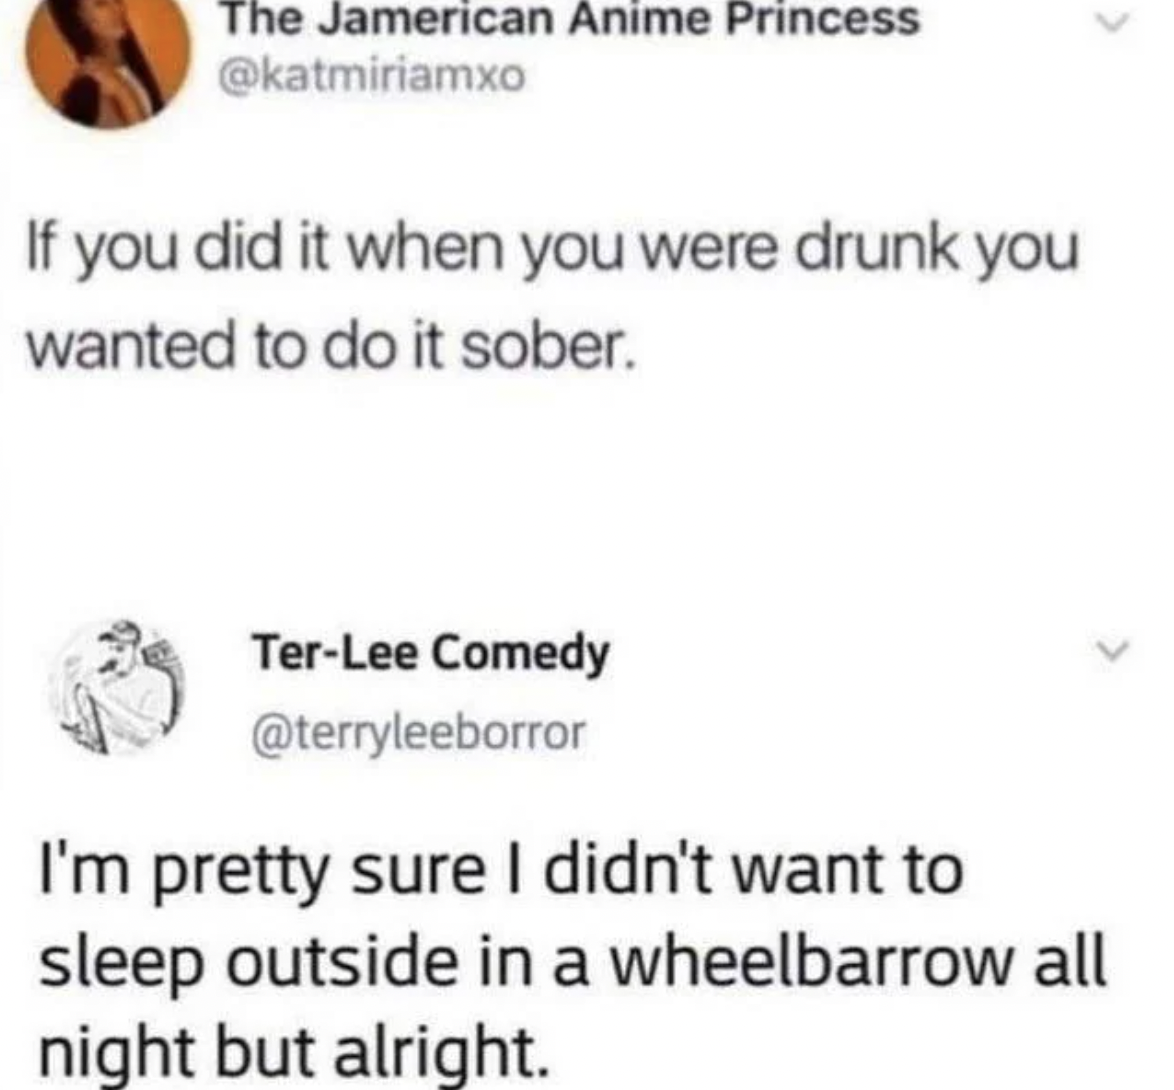 if you did it drunk you wanted - The Jamerican Anime Princess If you did it when you were drunk you wanted to do it sober. TerLee Comedy I'm pretty sure I didn't want to sleep outside in a wheelbarrow all night but alright.